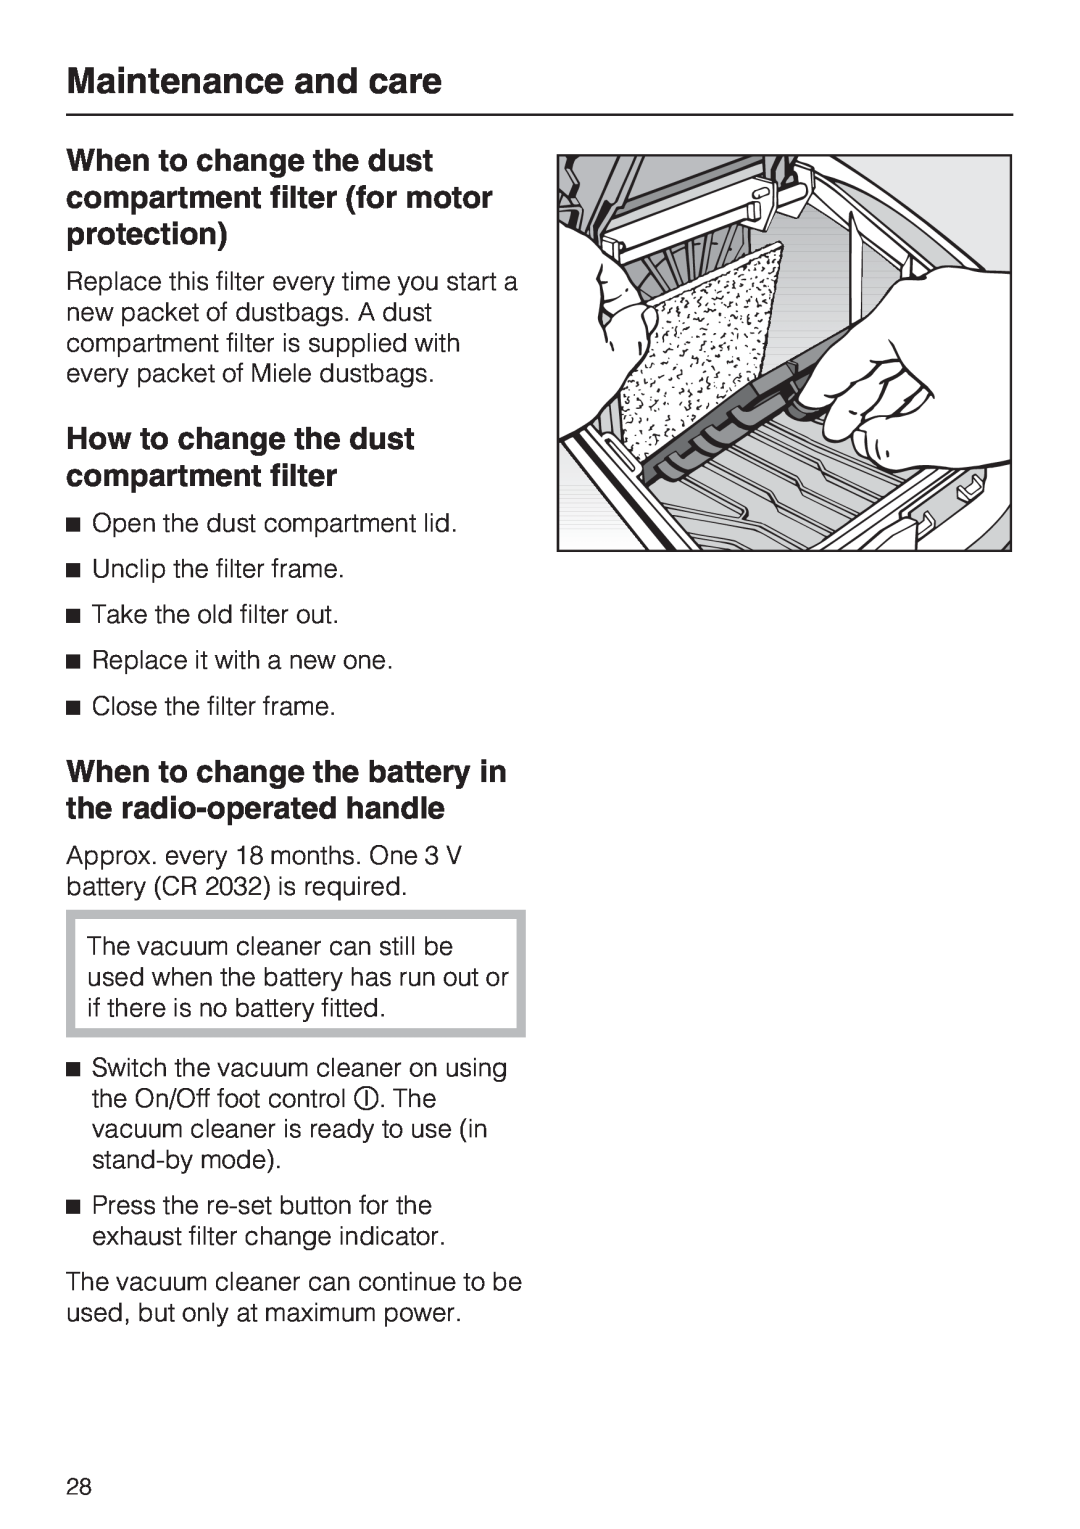 Miele S 4000 Series manual How to change the dust compartment filter, Maintenance and care 